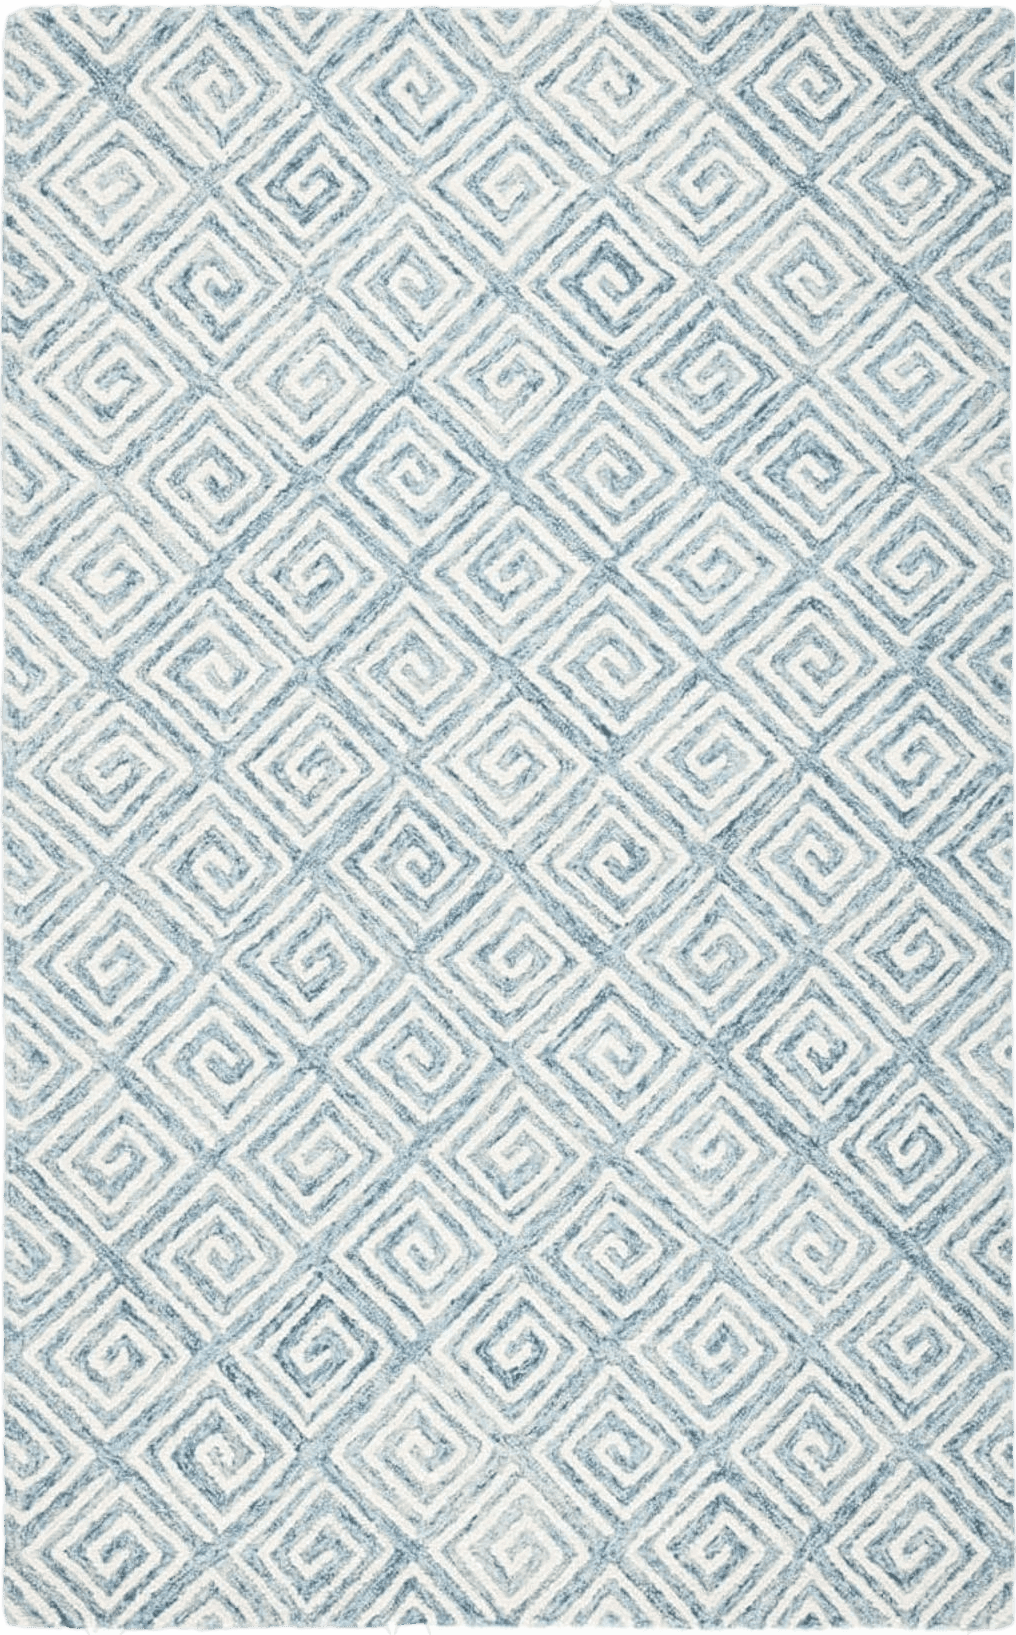 Safavieh Metro Collection Area Rug - 6' Round, Light Blue & Ivory, Handmade Wool, Ideal for High Traffic Areas in Living Room, Bedroom (MET455L)